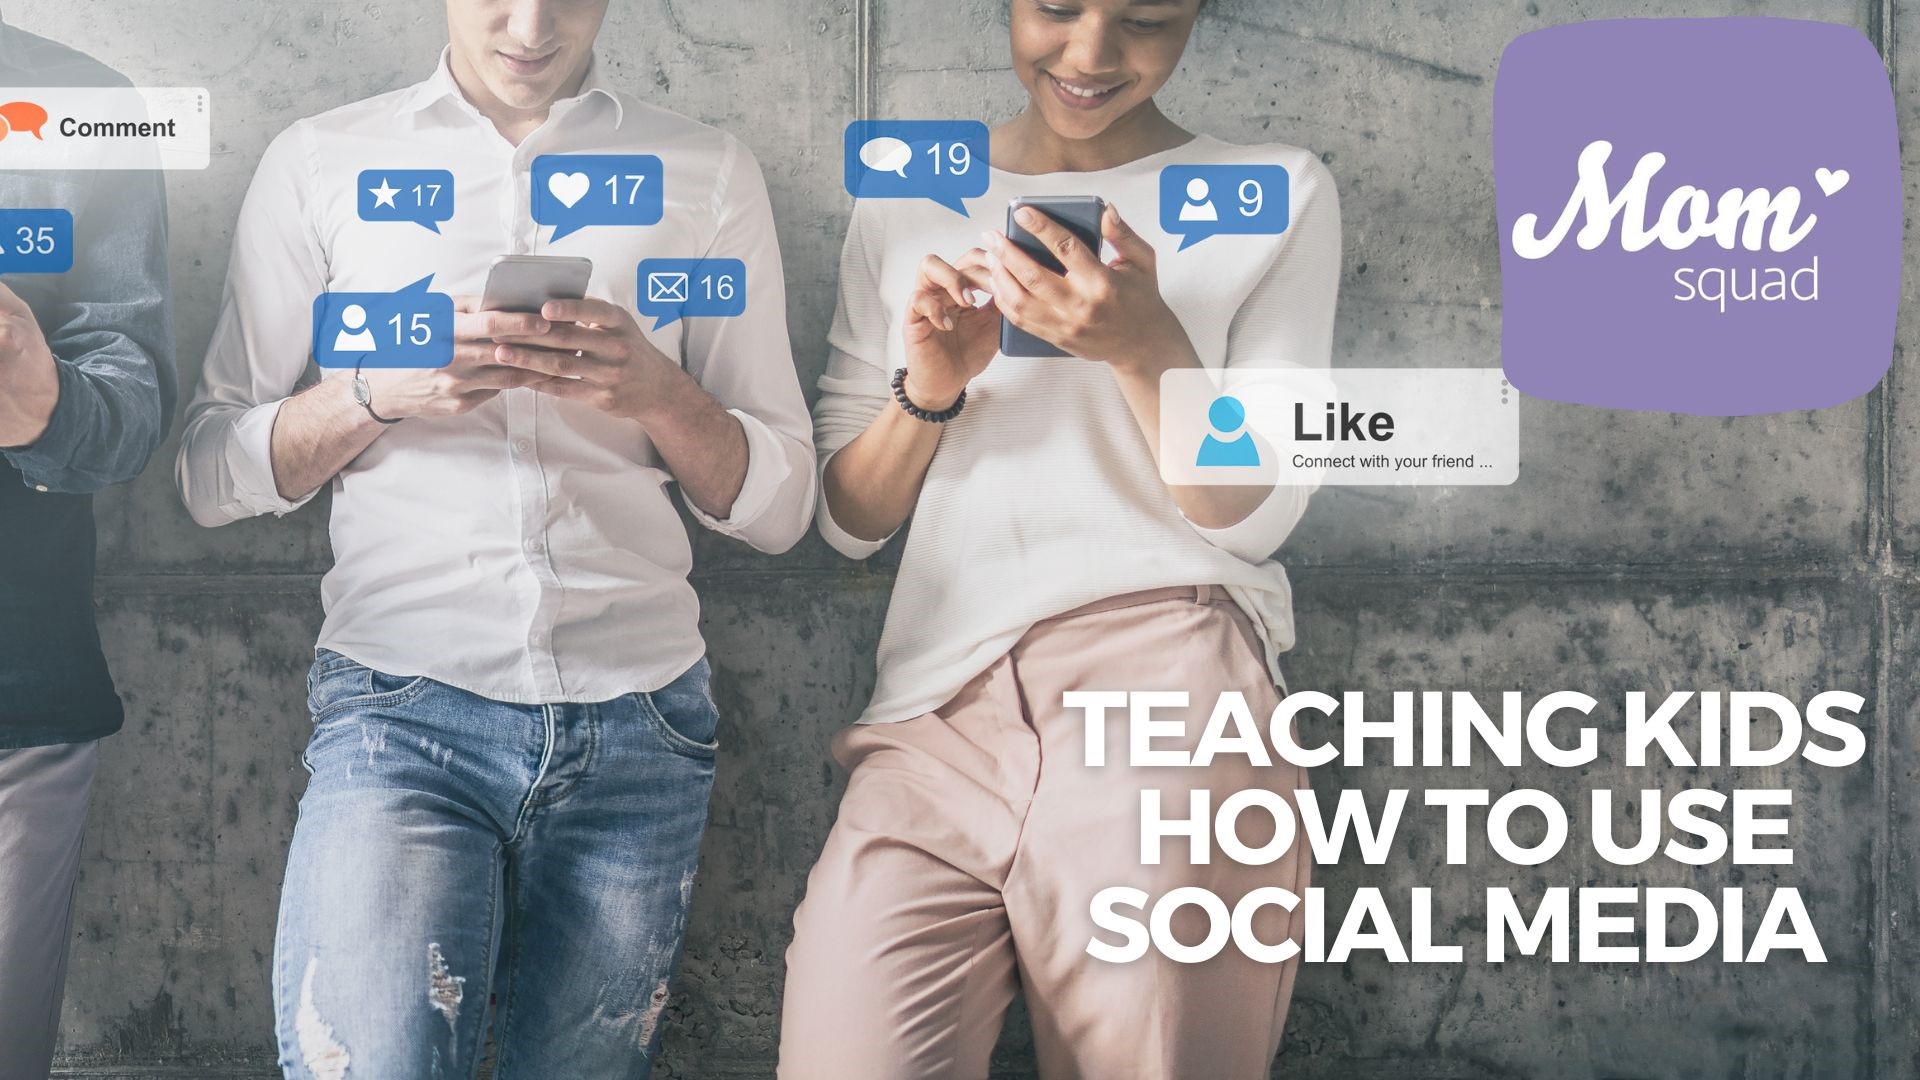 Maureen Kyle sits down with Laura Tierney to discuss how to teach kids to use social media in positive ways. Plus how to balance screentime, empower teens and more.